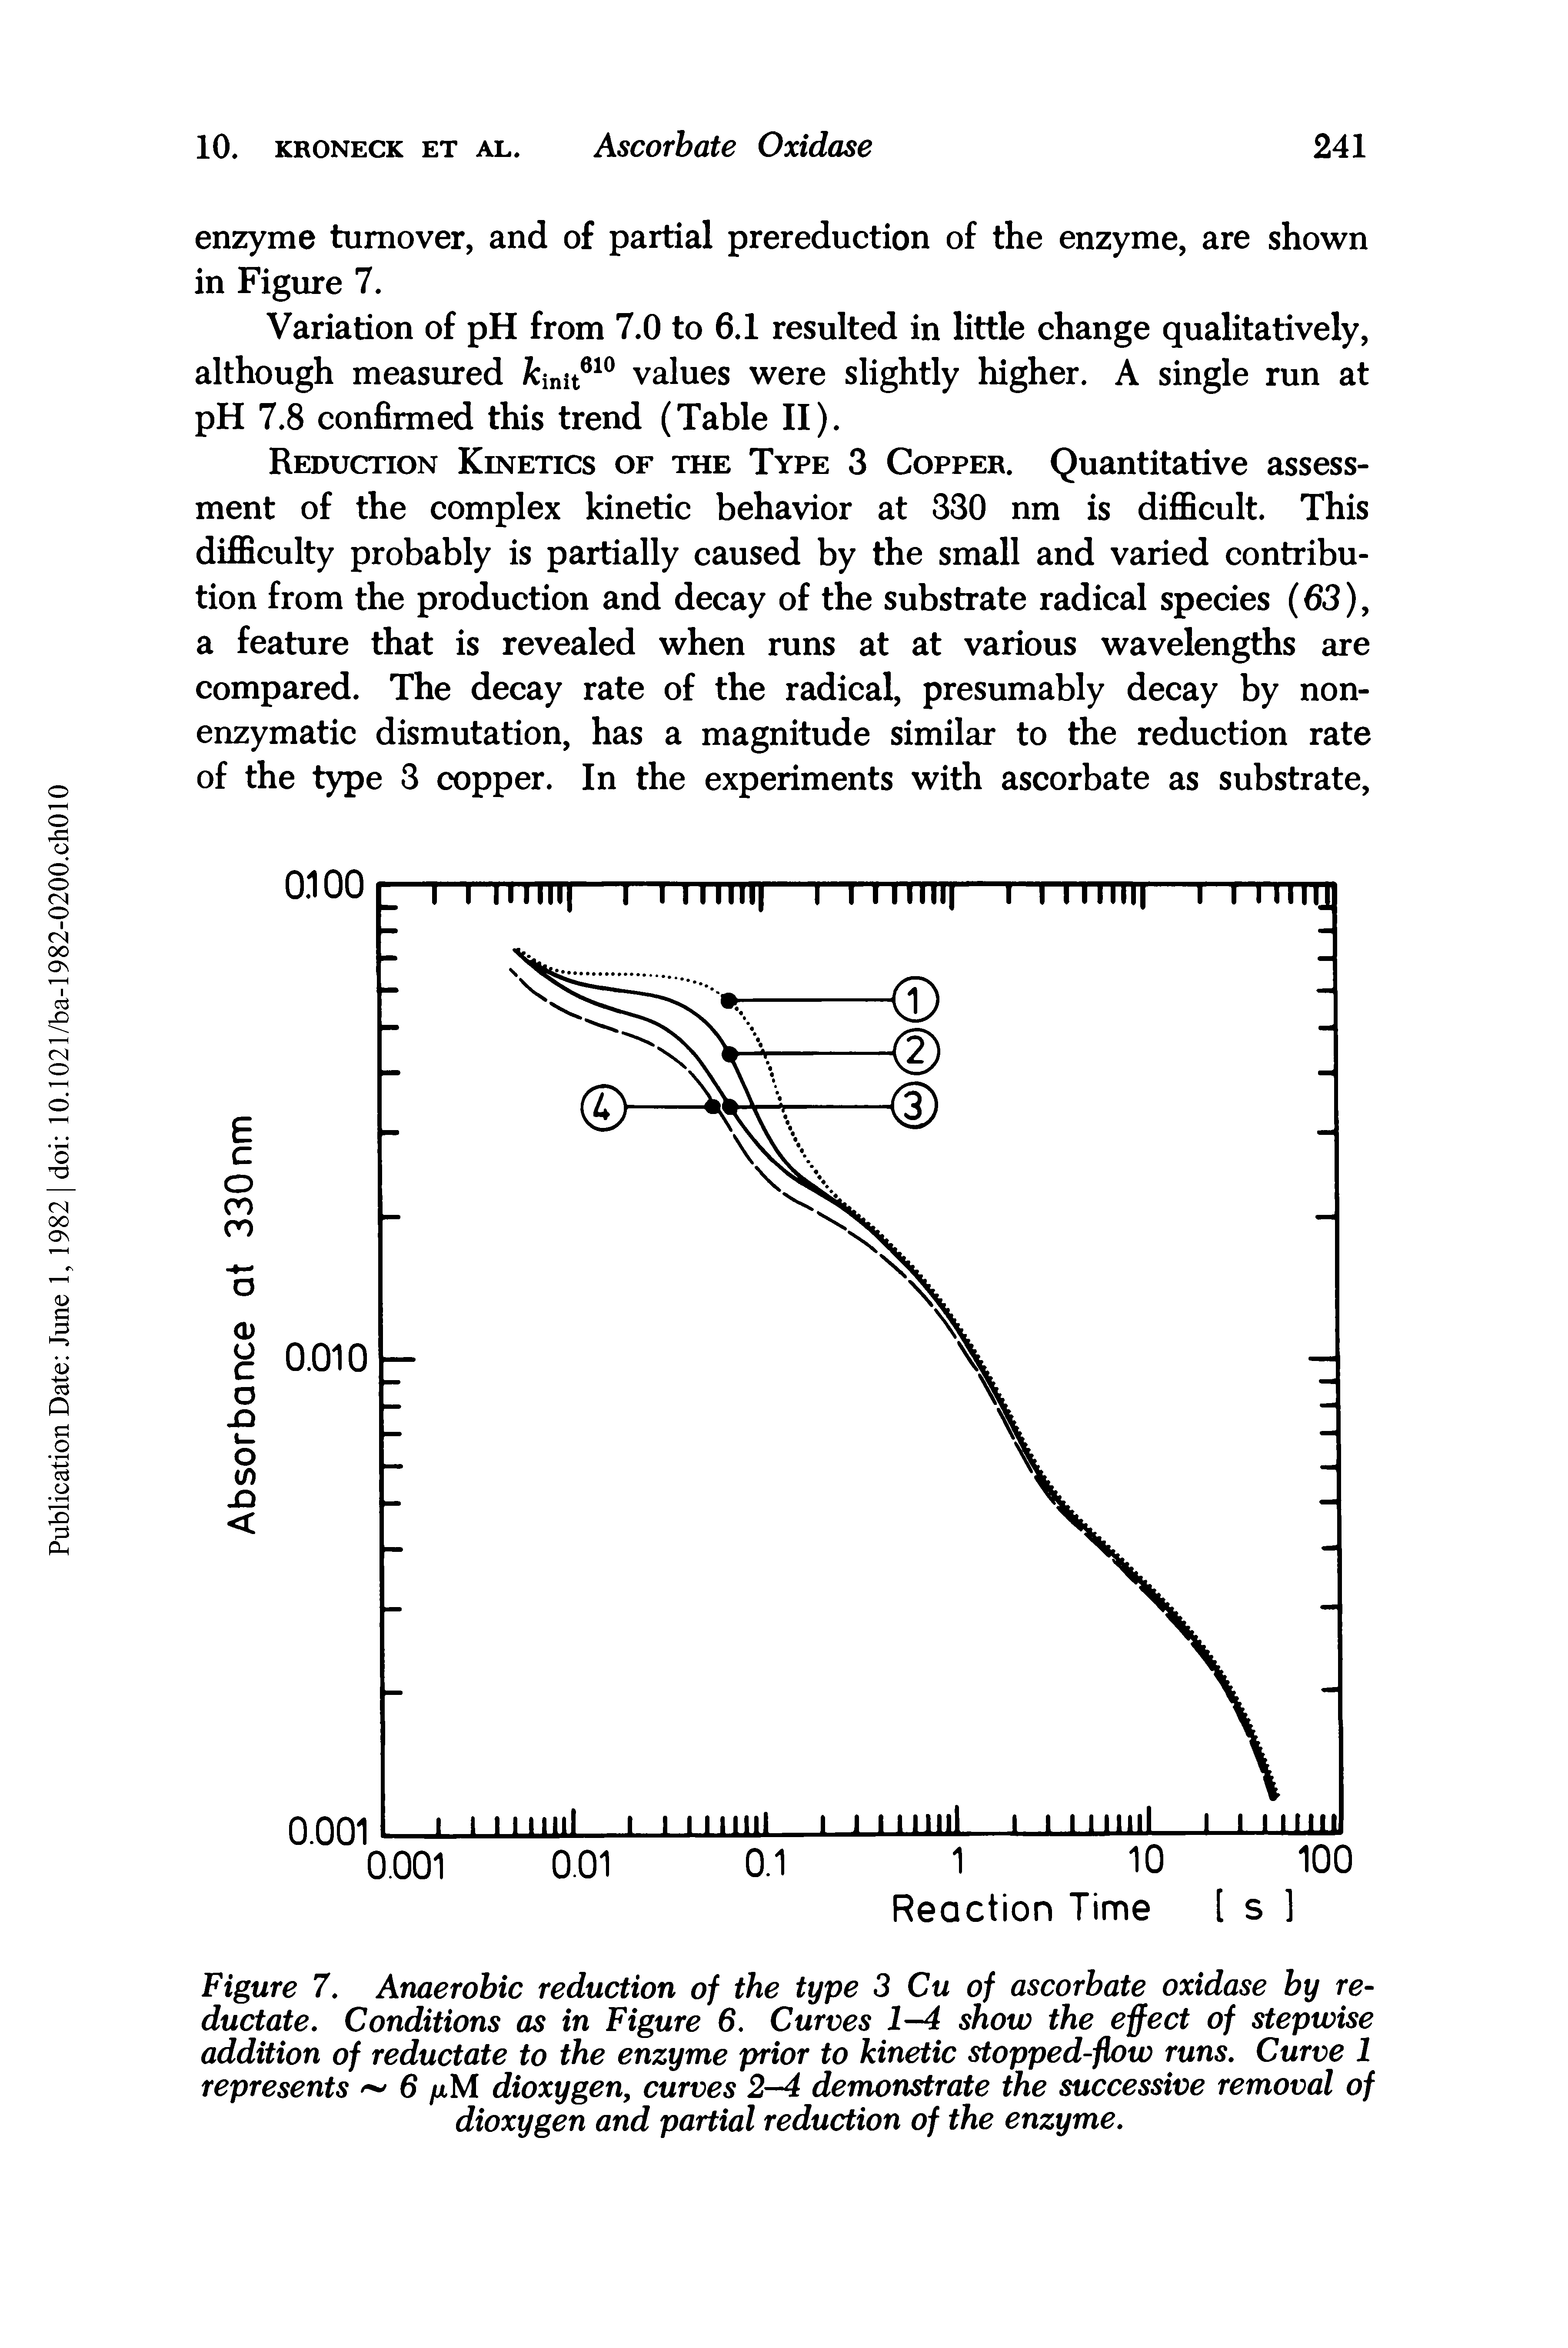 Figure 7. Anaerobic reduction of the type 3 Cu of ascorbate oxidase by re-ductate. Conditions as in Figure 6. Curves 1—4 show the effect of stepwise addition of reductate to the enzyme prior to kinetic stopped-fhw runs. Curve 1 represents 6 fxM dioxygen, curves 2—4 demonstrate the successive removal of dioxygen and partial reduction of the enzyme.